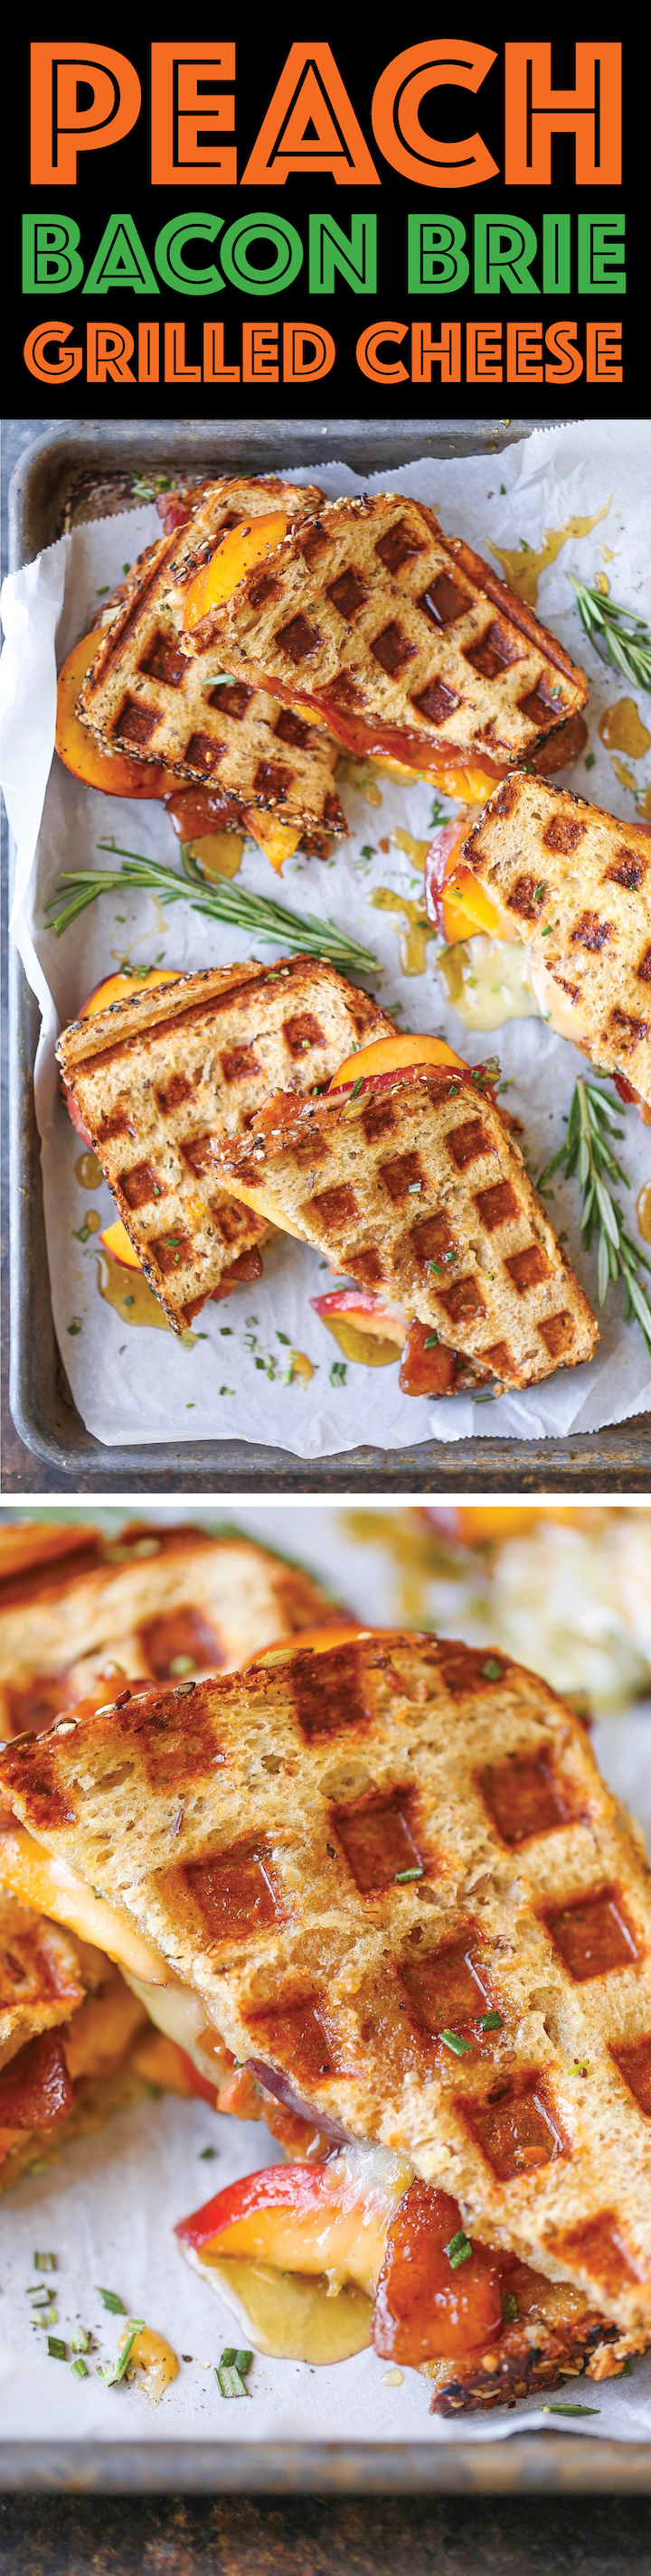 Peach Bacon Brie Grilled Cheese - Fresh peaches, peach preserves, crisp bacon and ooey gooey melted brie sandwiches made right in the waffle maker! SO EASY!